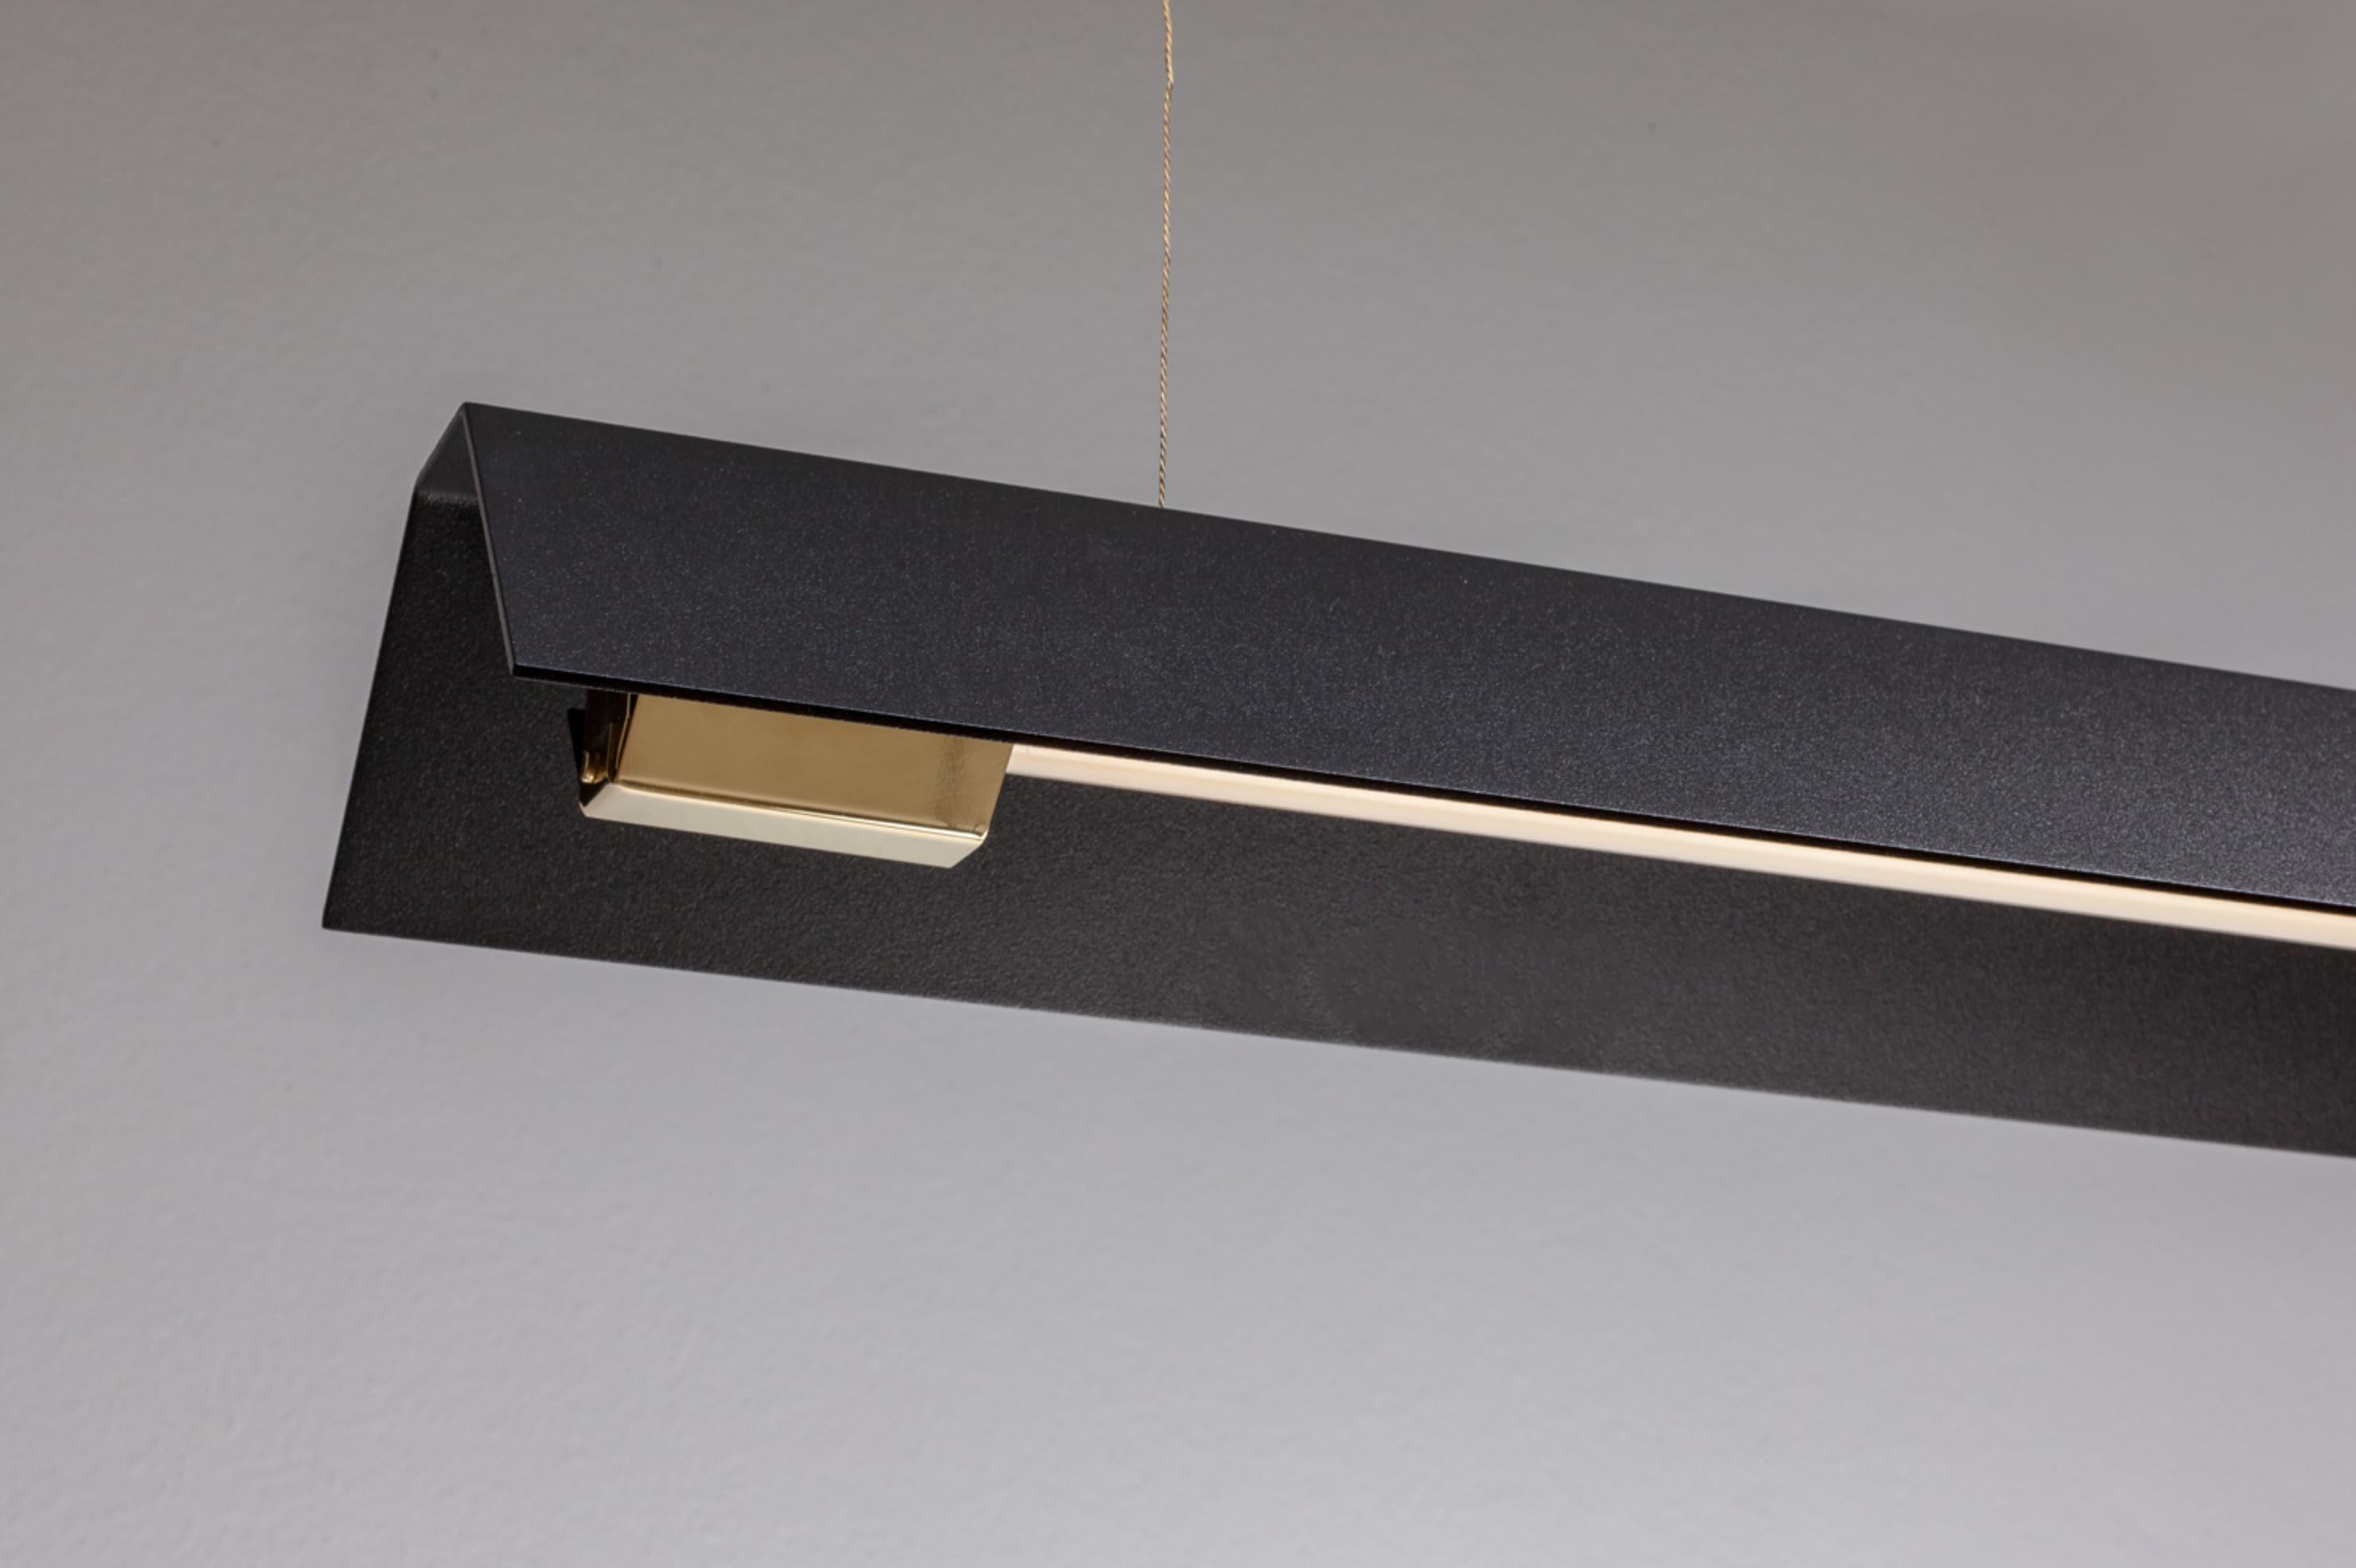 Large Misalliance Ex jet black suspended light by Lexavala.
Dimensions: D 16 x W 130 x H 8 cm
Materials: powder coated shade with details made of brass or stainless steel.

There are two lenghts of socket covers, extending over the LED. Two